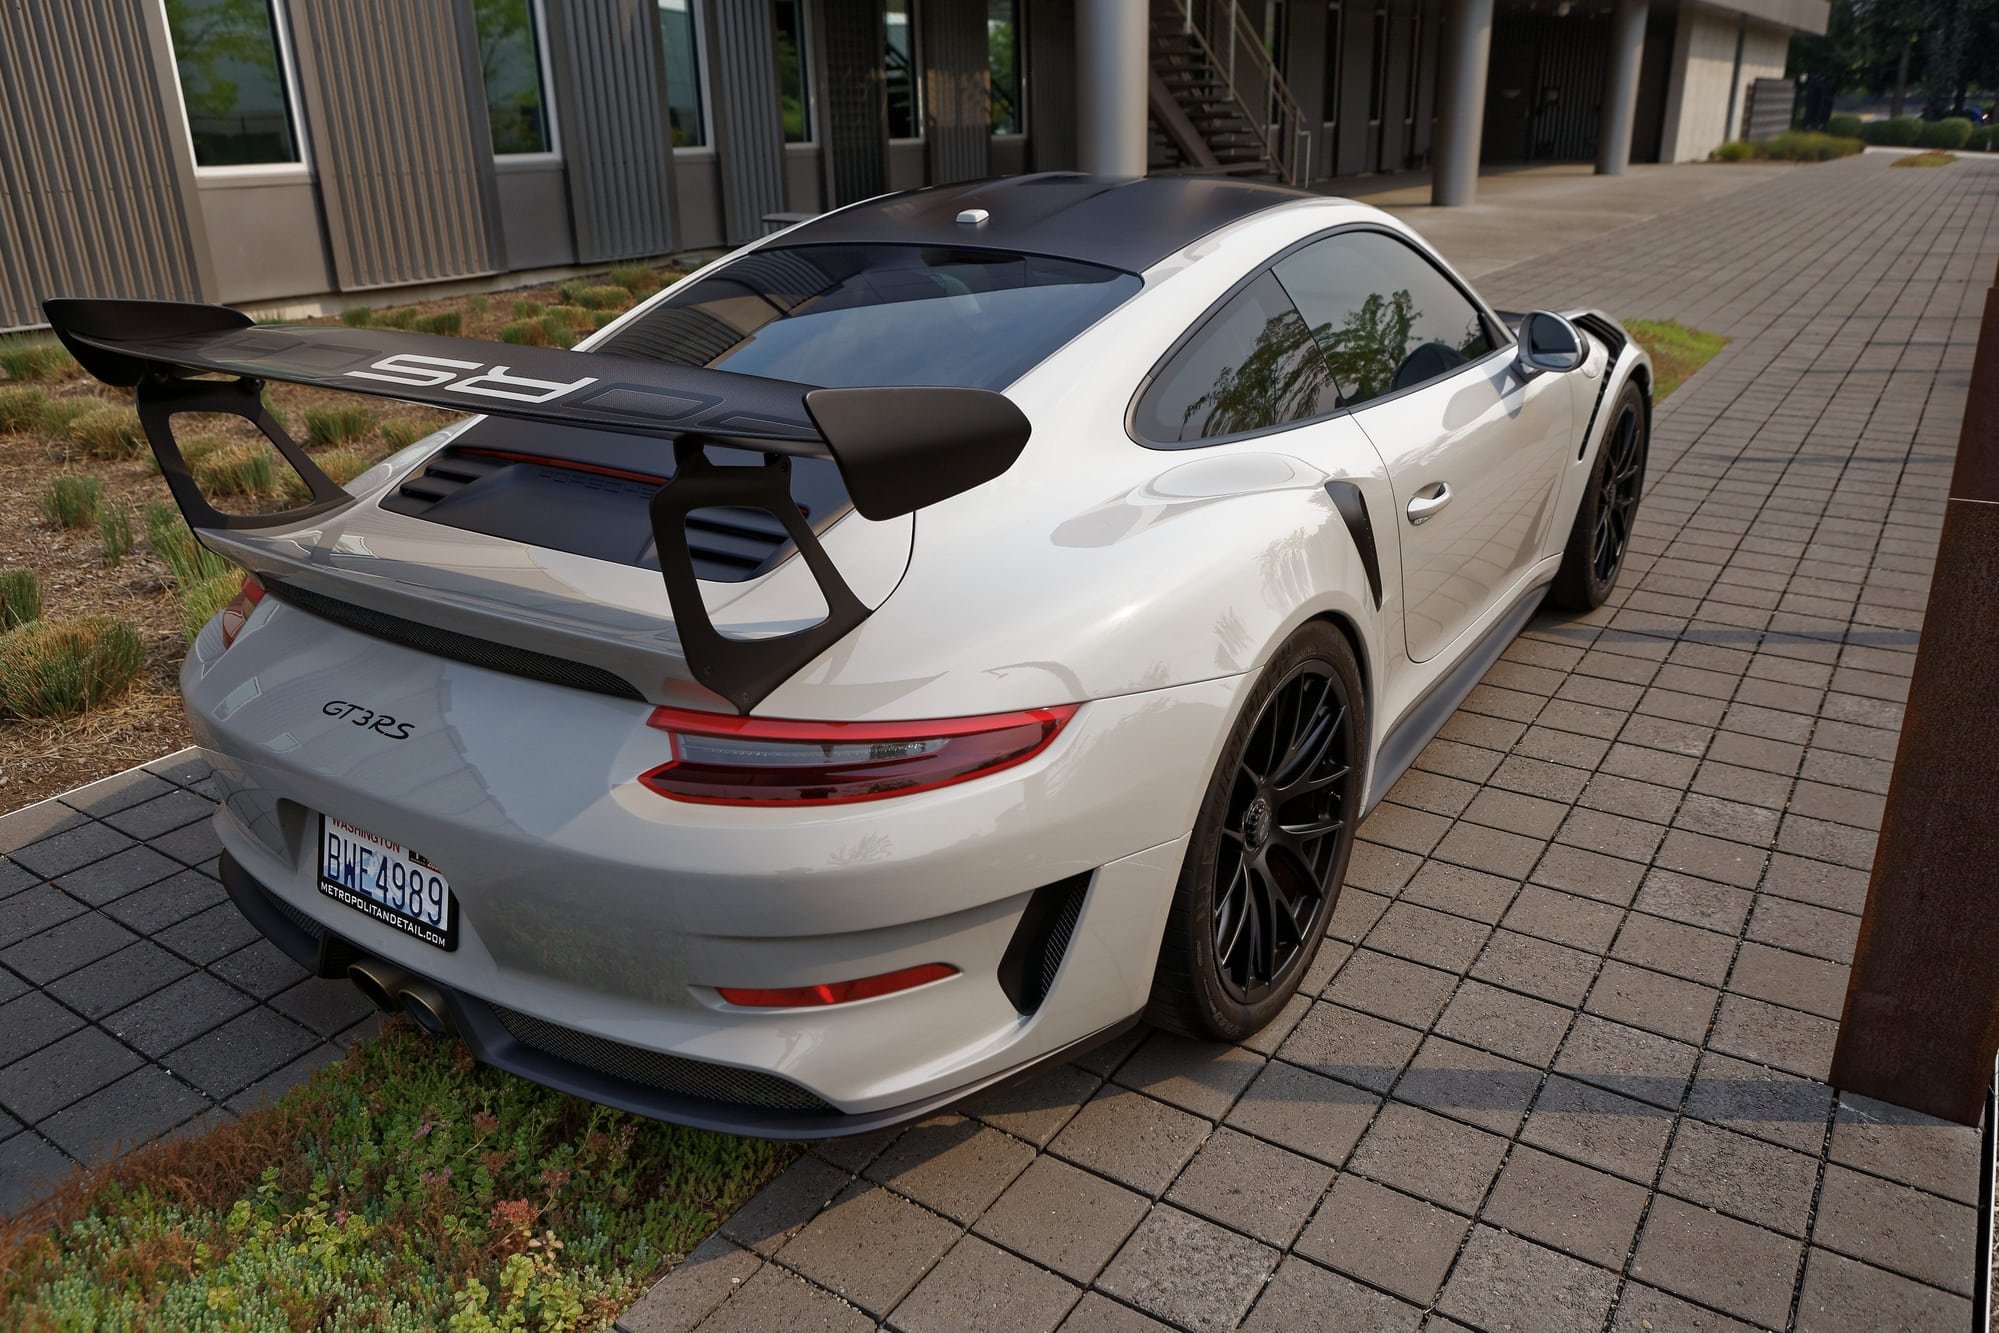 2019 Porsche GT3 - Perfect Spec 2019 GT3RS Chalk, Magnesium Wheels, Weissach - Used - VIN wp0af2a92ks165907 - 2,400 Miles - 6 cyl - 2WD - Automatic - Coupe - Other - Redmond, WA 98052, United States